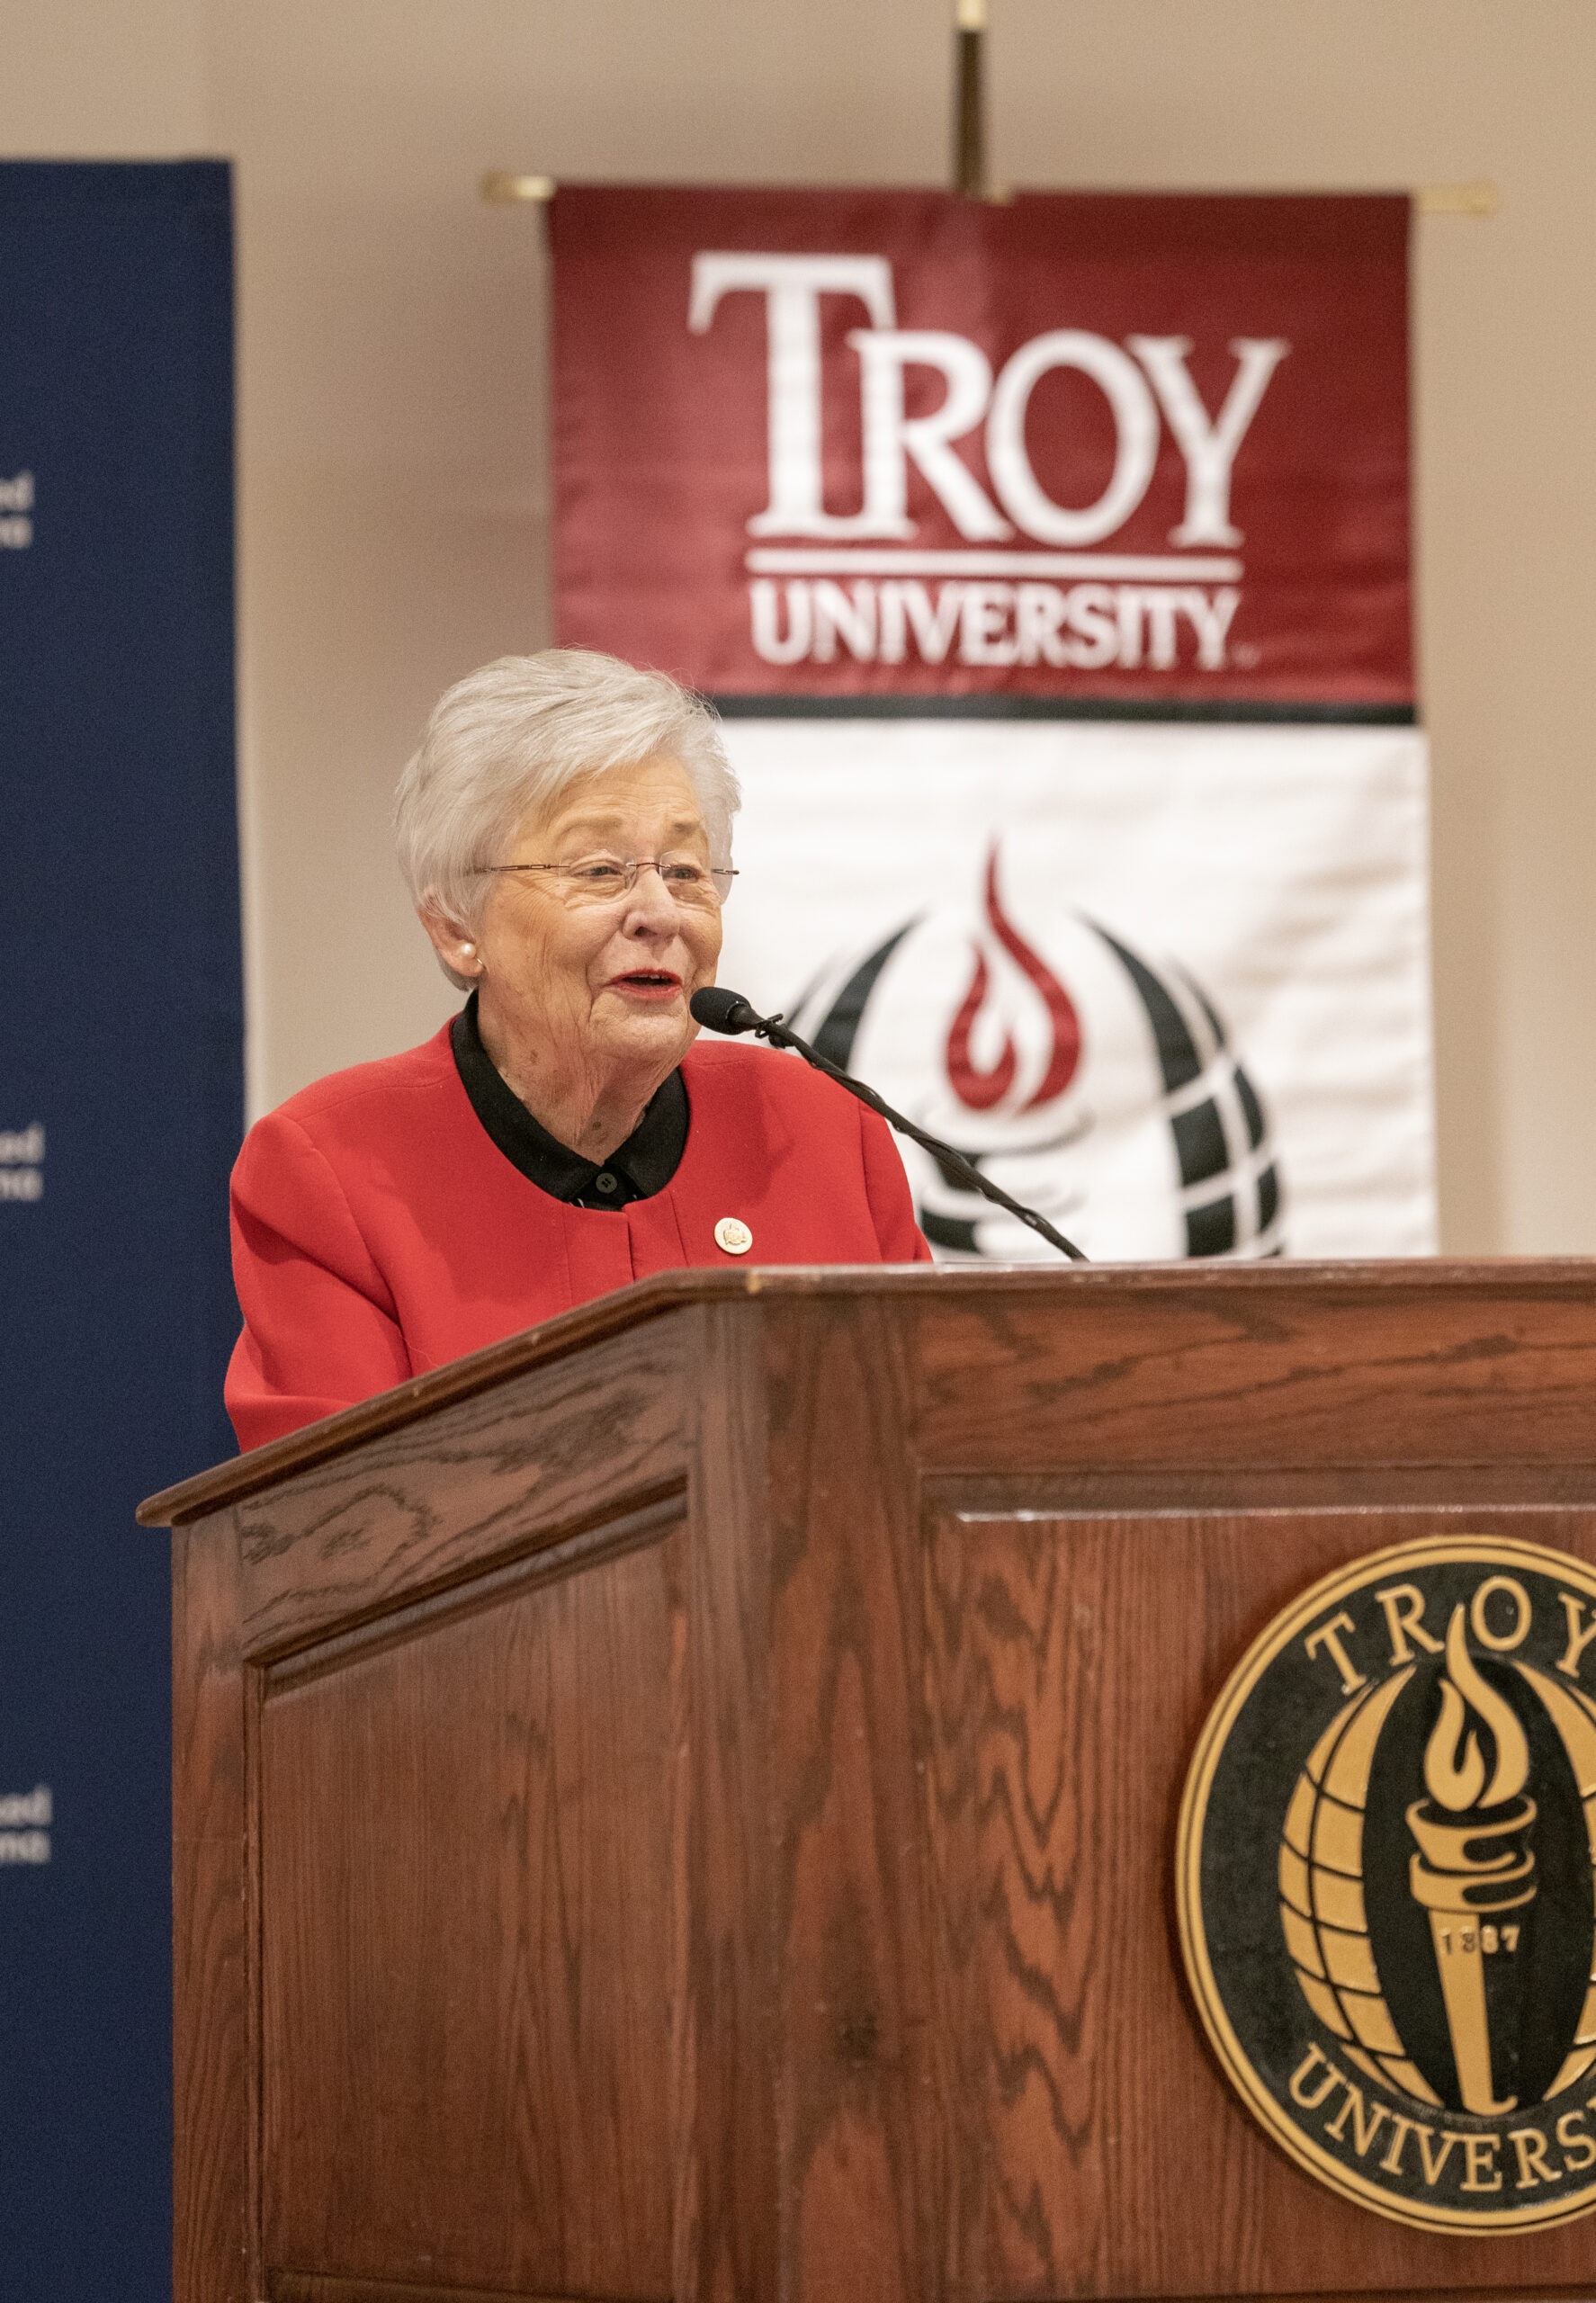 Governor Ivey Makes Fourth Stop on Statewide Broadband Tour, Discusses Education and Announces Progress in Expanding Broadband Infrastructure